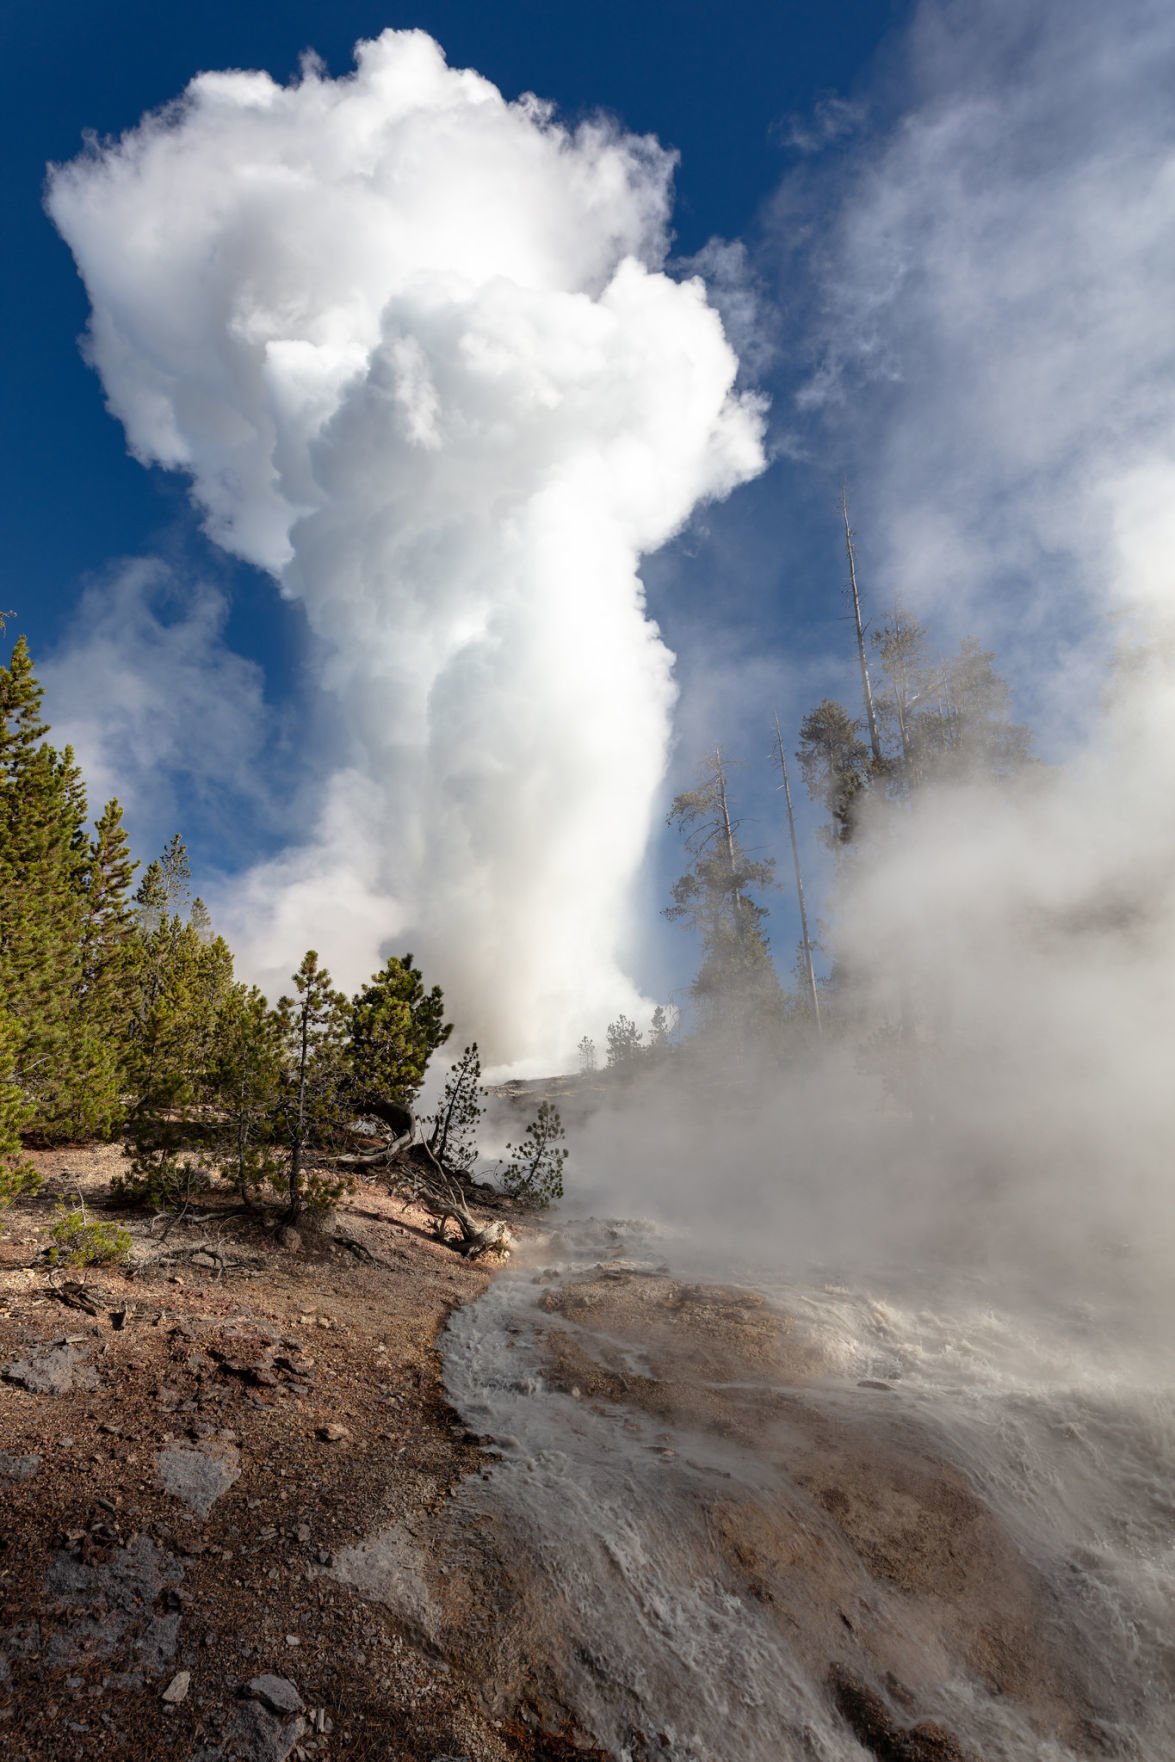 Yellowstone S Steamboat Geyser Erupts For Record 30th Time This Year